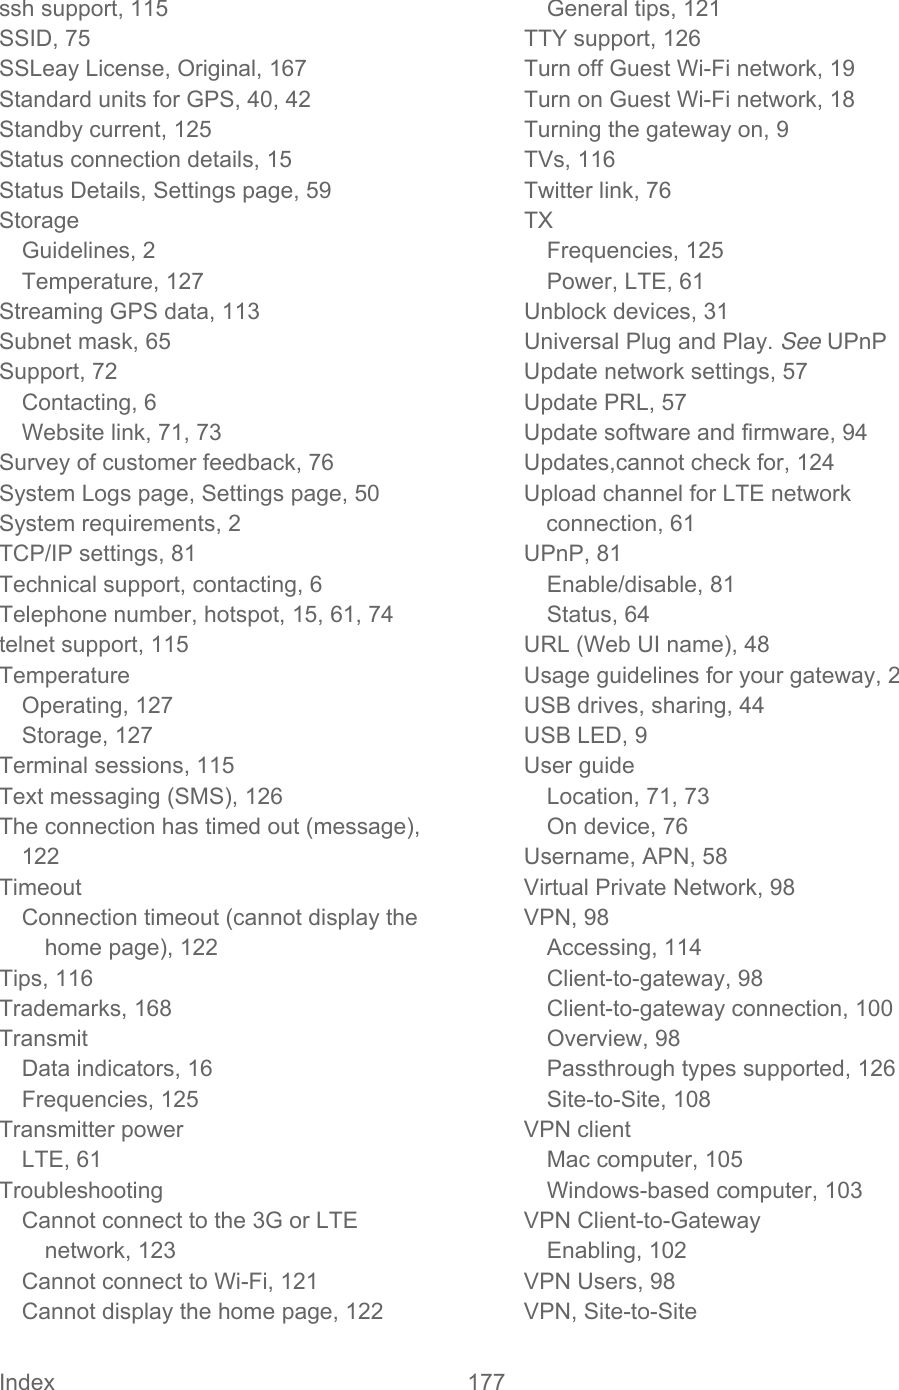 Index 177   ssh support, 115 SSID, 75 SSLeay License, Original, 167 Standard units for GPS, 40, 42 Standby current, 125 Status connection details, 15 Status Details, Settings page, 59 Storage Guidelines, 2 Temperature, 127 Streaming GPS data, 113 Subnet mask, 65 Support, 72 Contacting, 6 Website link, 71, 73 Survey of customer feedback, 76 System Logs page, Settings page, 50 System requirements, 2 TCP/IP settings, 81 Technical support, contacting, 6 Telephone number, hotspot, 15, 61, 74 telnet support, 115 Temperature Operating, 127 Storage, 127 Terminal sessions, 115 Text messaging (SMS), 126 The connection has timed out (message), 122 Timeout Connection timeout (cannot display the home page), 122 Tips, 116 Trademarks, 168 Transmit Data indicators, 16 Frequencies, 125 Transmitter power LTE, 61 Troubleshooting Cannot connect to the 3G or LTE network, 123 Cannot connect to Wi-Fi, 121 Cannot display the home page, 122 General tips, 121 TTY support, 126 Turn off Guest Wi-Fi network, 19 Turn on Guest Wi-Fi network, 18 Turning the gateway on, 9 TVs, 116 Twitter link, 76 TX Frequencies, 125 Power, LTE, 61 Unblock devices, 31 Universal Plug and Play. See UPnP Update network settings, 57 Update PRL, 57 Update software and firmware, 94 Updates,cannot check for, 124 Upload channel for LTE network connection, 61 UPnP, 81 Enable/disable, 81 Status, 64 URL (Web UI name), 48 Usage guidelines for your gateway, 2 USB drives, sharing, 44 USB LED, 9 User guide Location, 71, 73 On device, 76 Username, APN, 58 Virtual Private Network, 98 VPN, 98 Accessing, 114 Client-to-gateway, 98 Client-to-gateway connection, 100 Overview, 98 Passthrough types supported, 126 Site-to-Site, 108 VPN client Mac computer, 105 Windows-based computer, 103 VPN Client-to-Gateway Enabling, 102 VPN Users, 98 VPN, Site-to-Site 